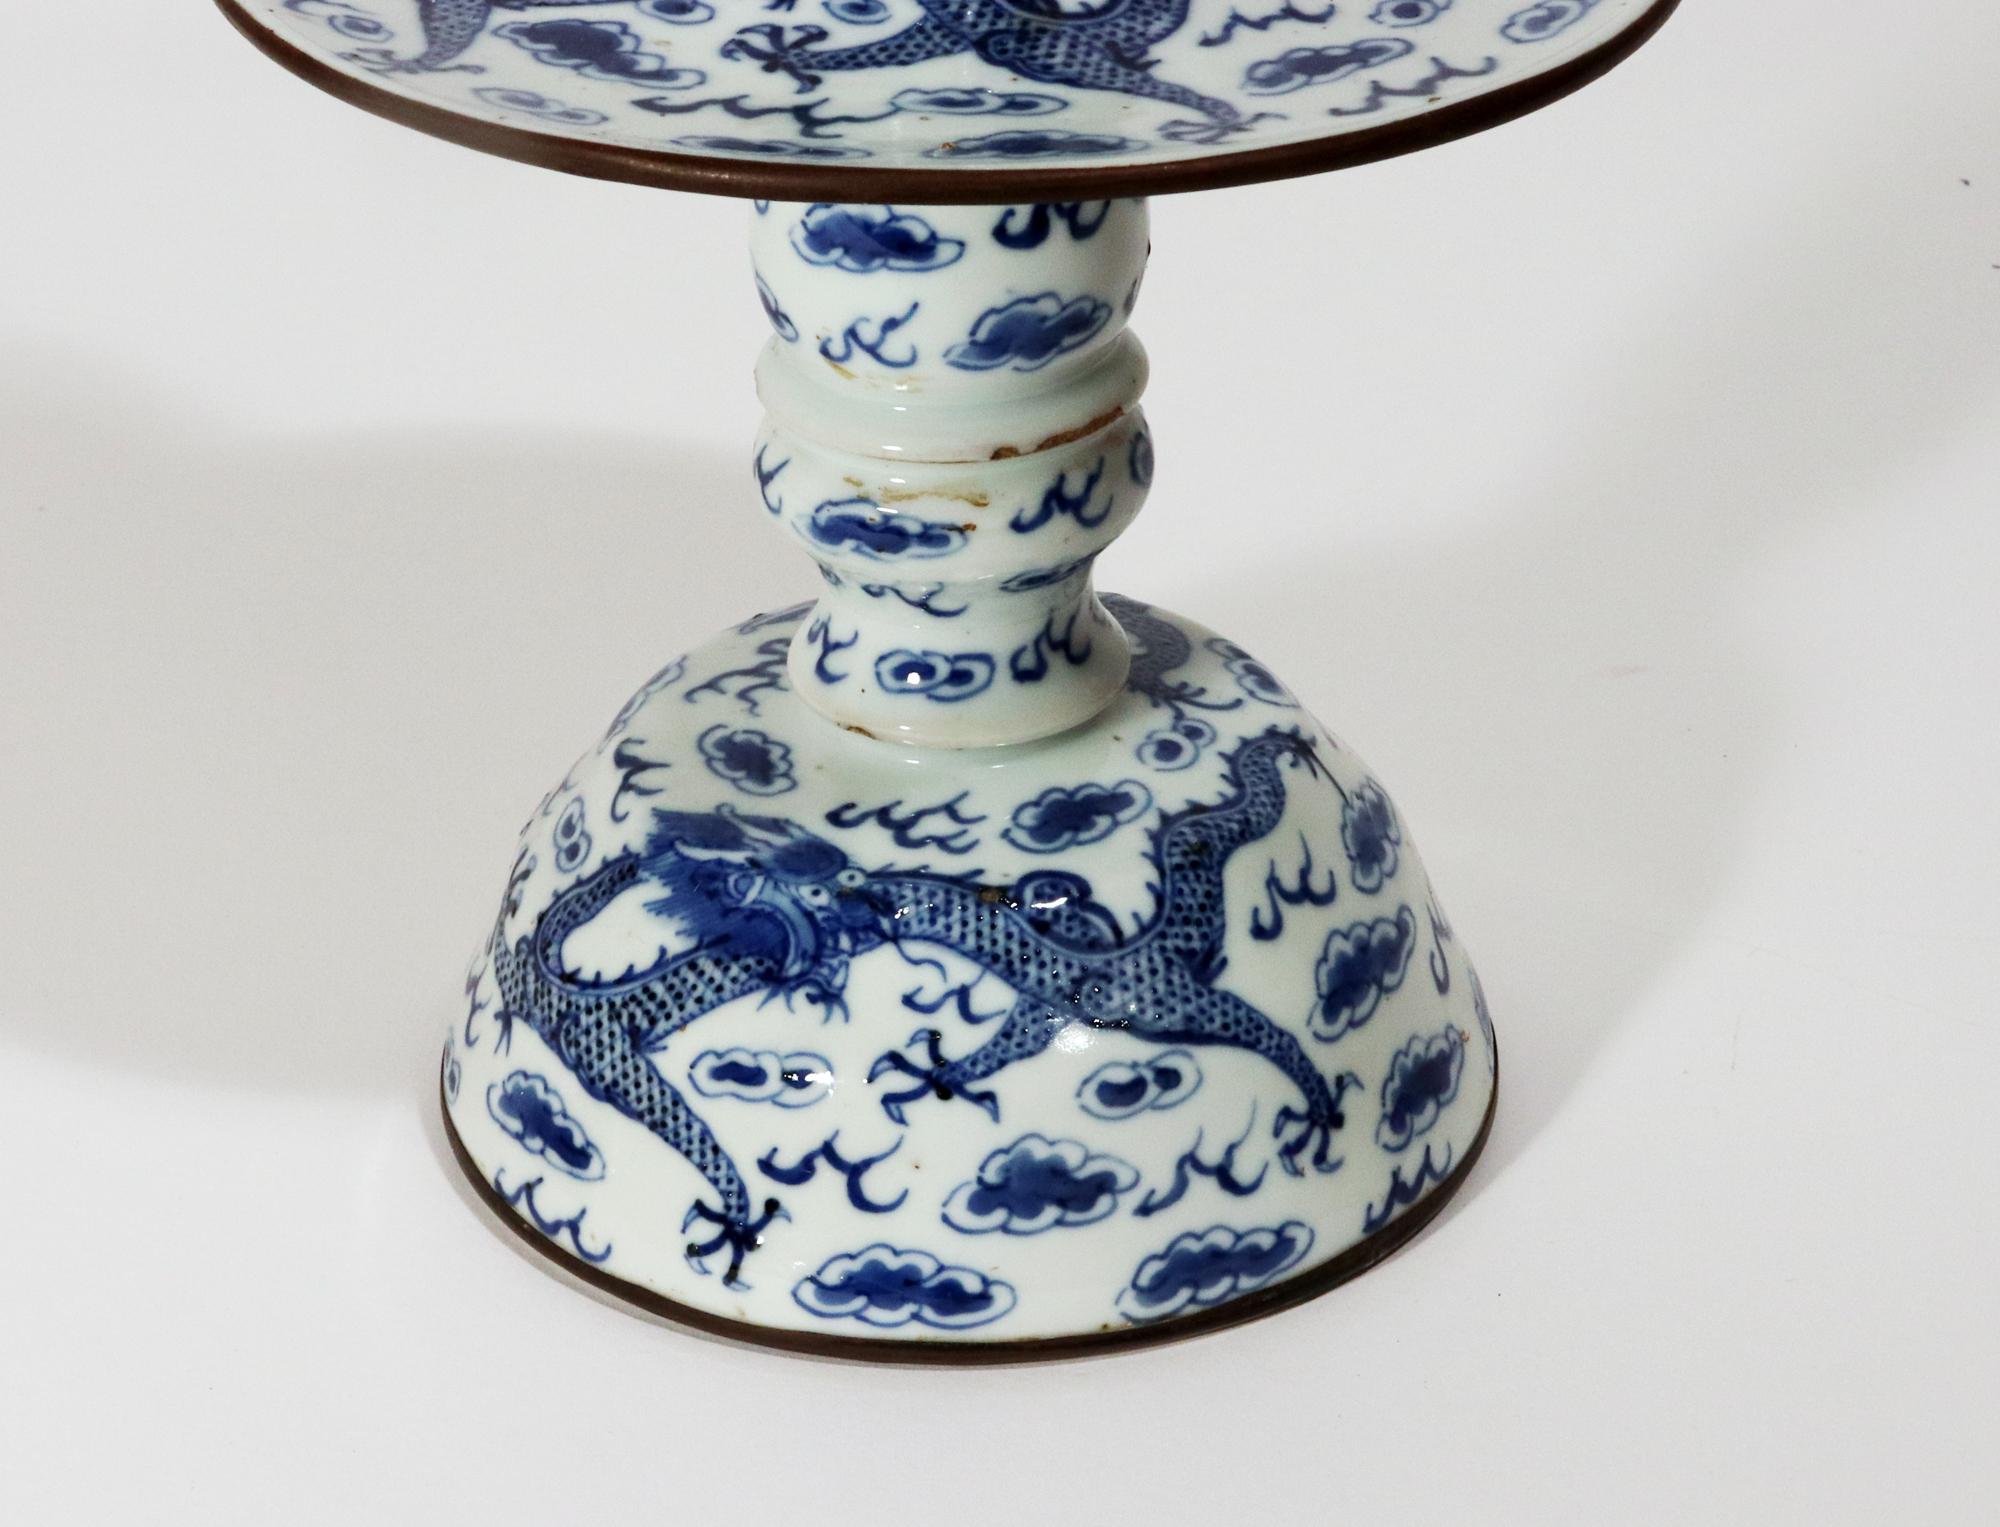 Chinese Export Porcelain Underglaze Blue Pair of Candlesticks For Sale 2